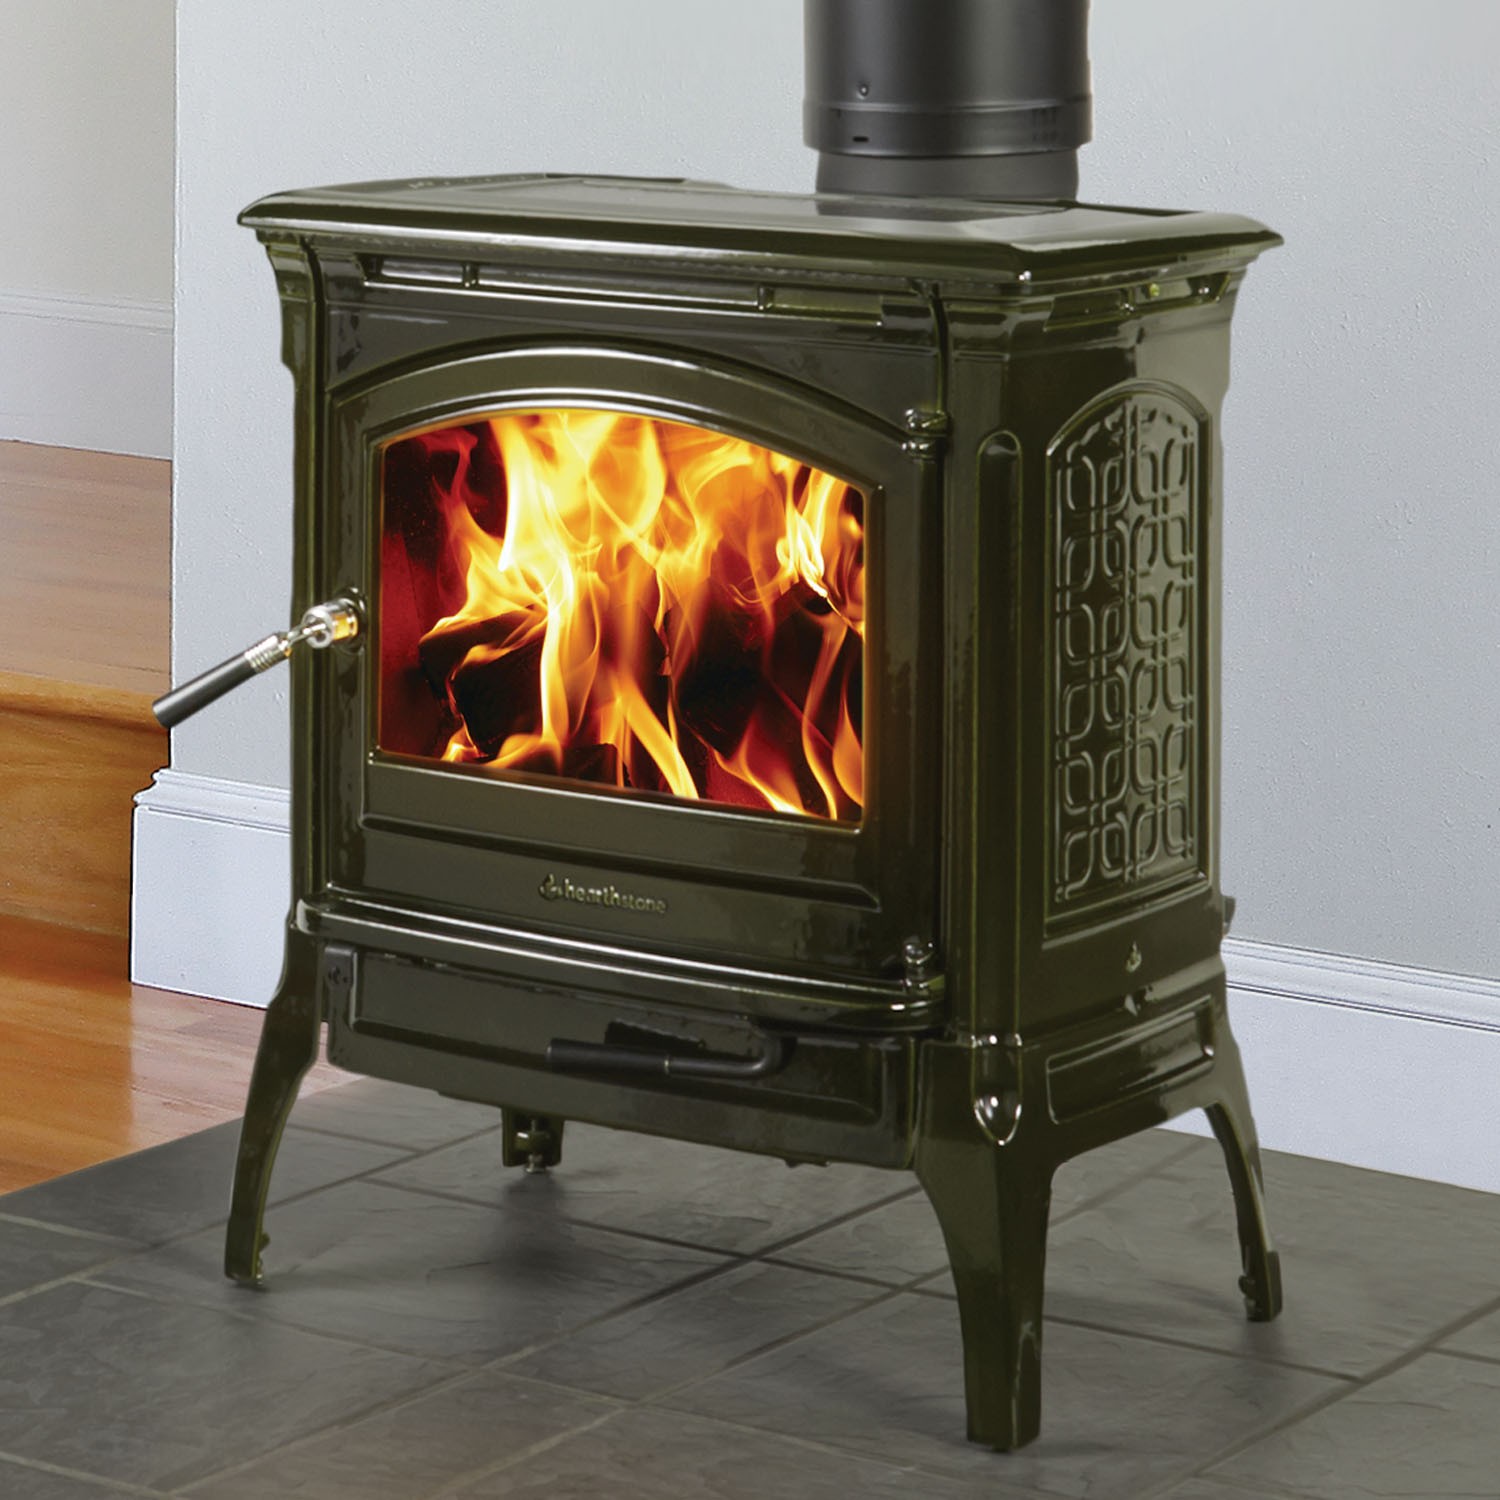 Traditional Cast Iron Stove with design on the side glass front with handle on tile flooring and gray wall in the background.